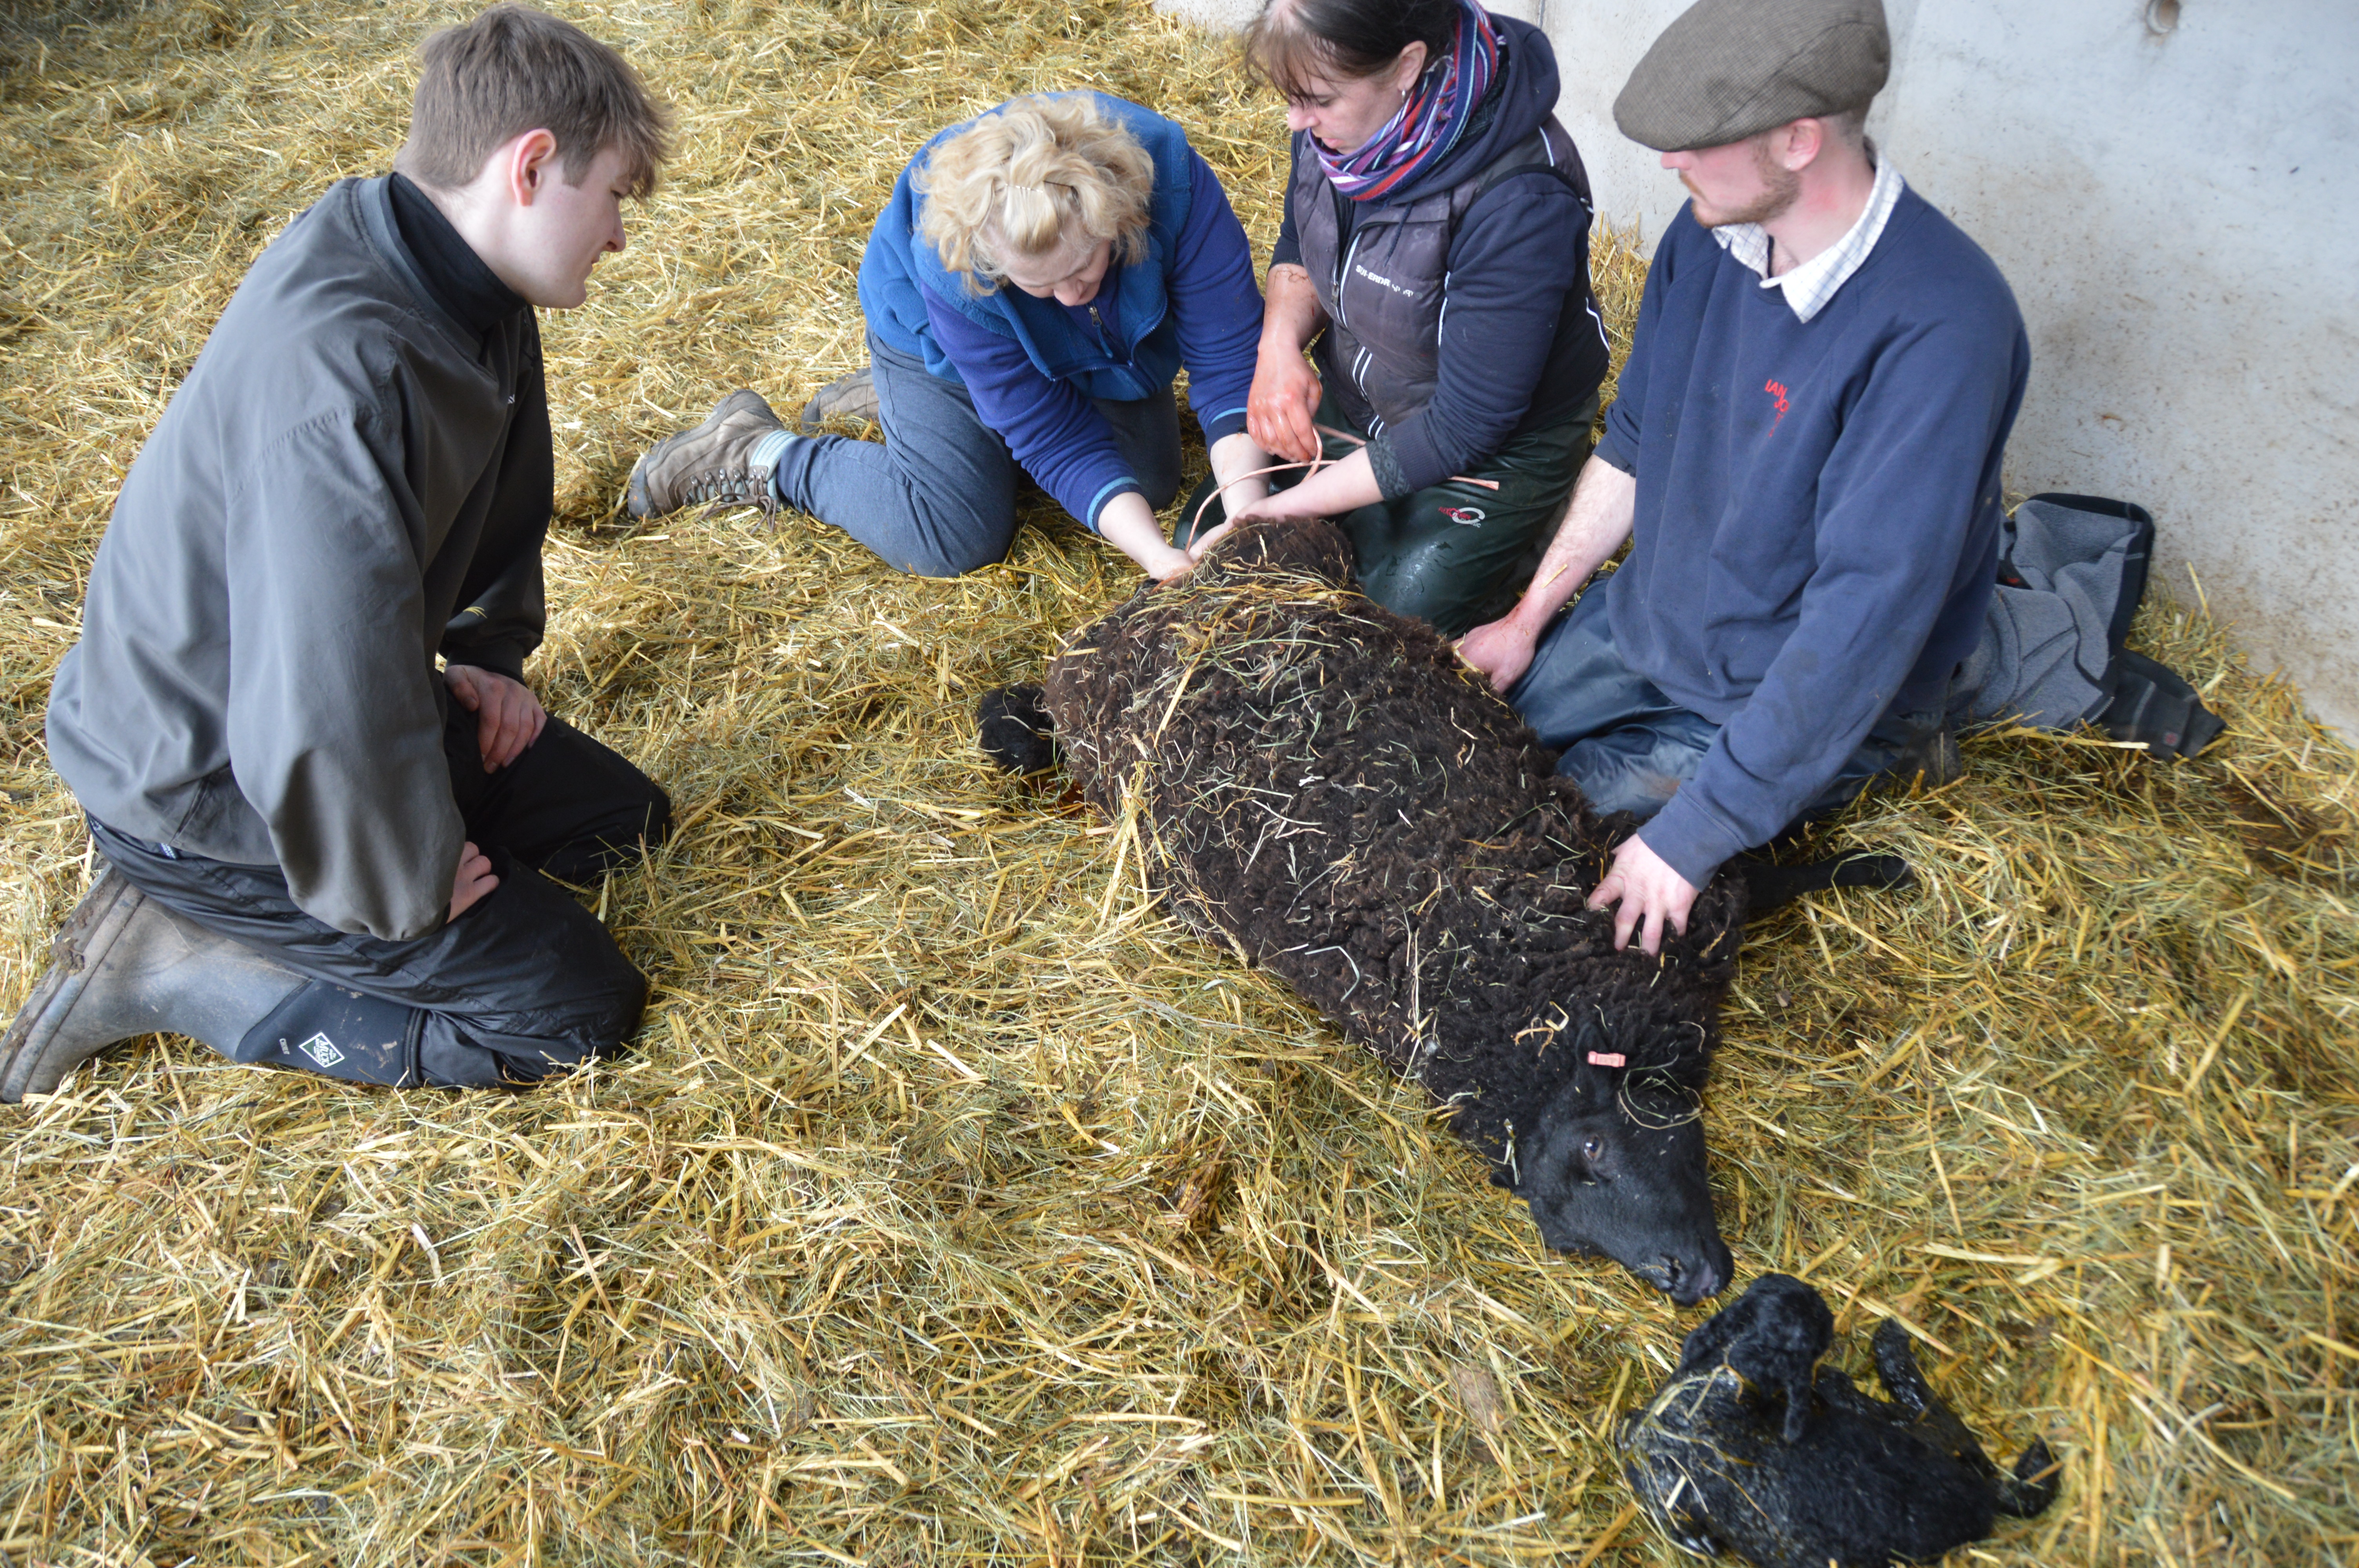 Image: Lambing course at St Fagans National Museum of History